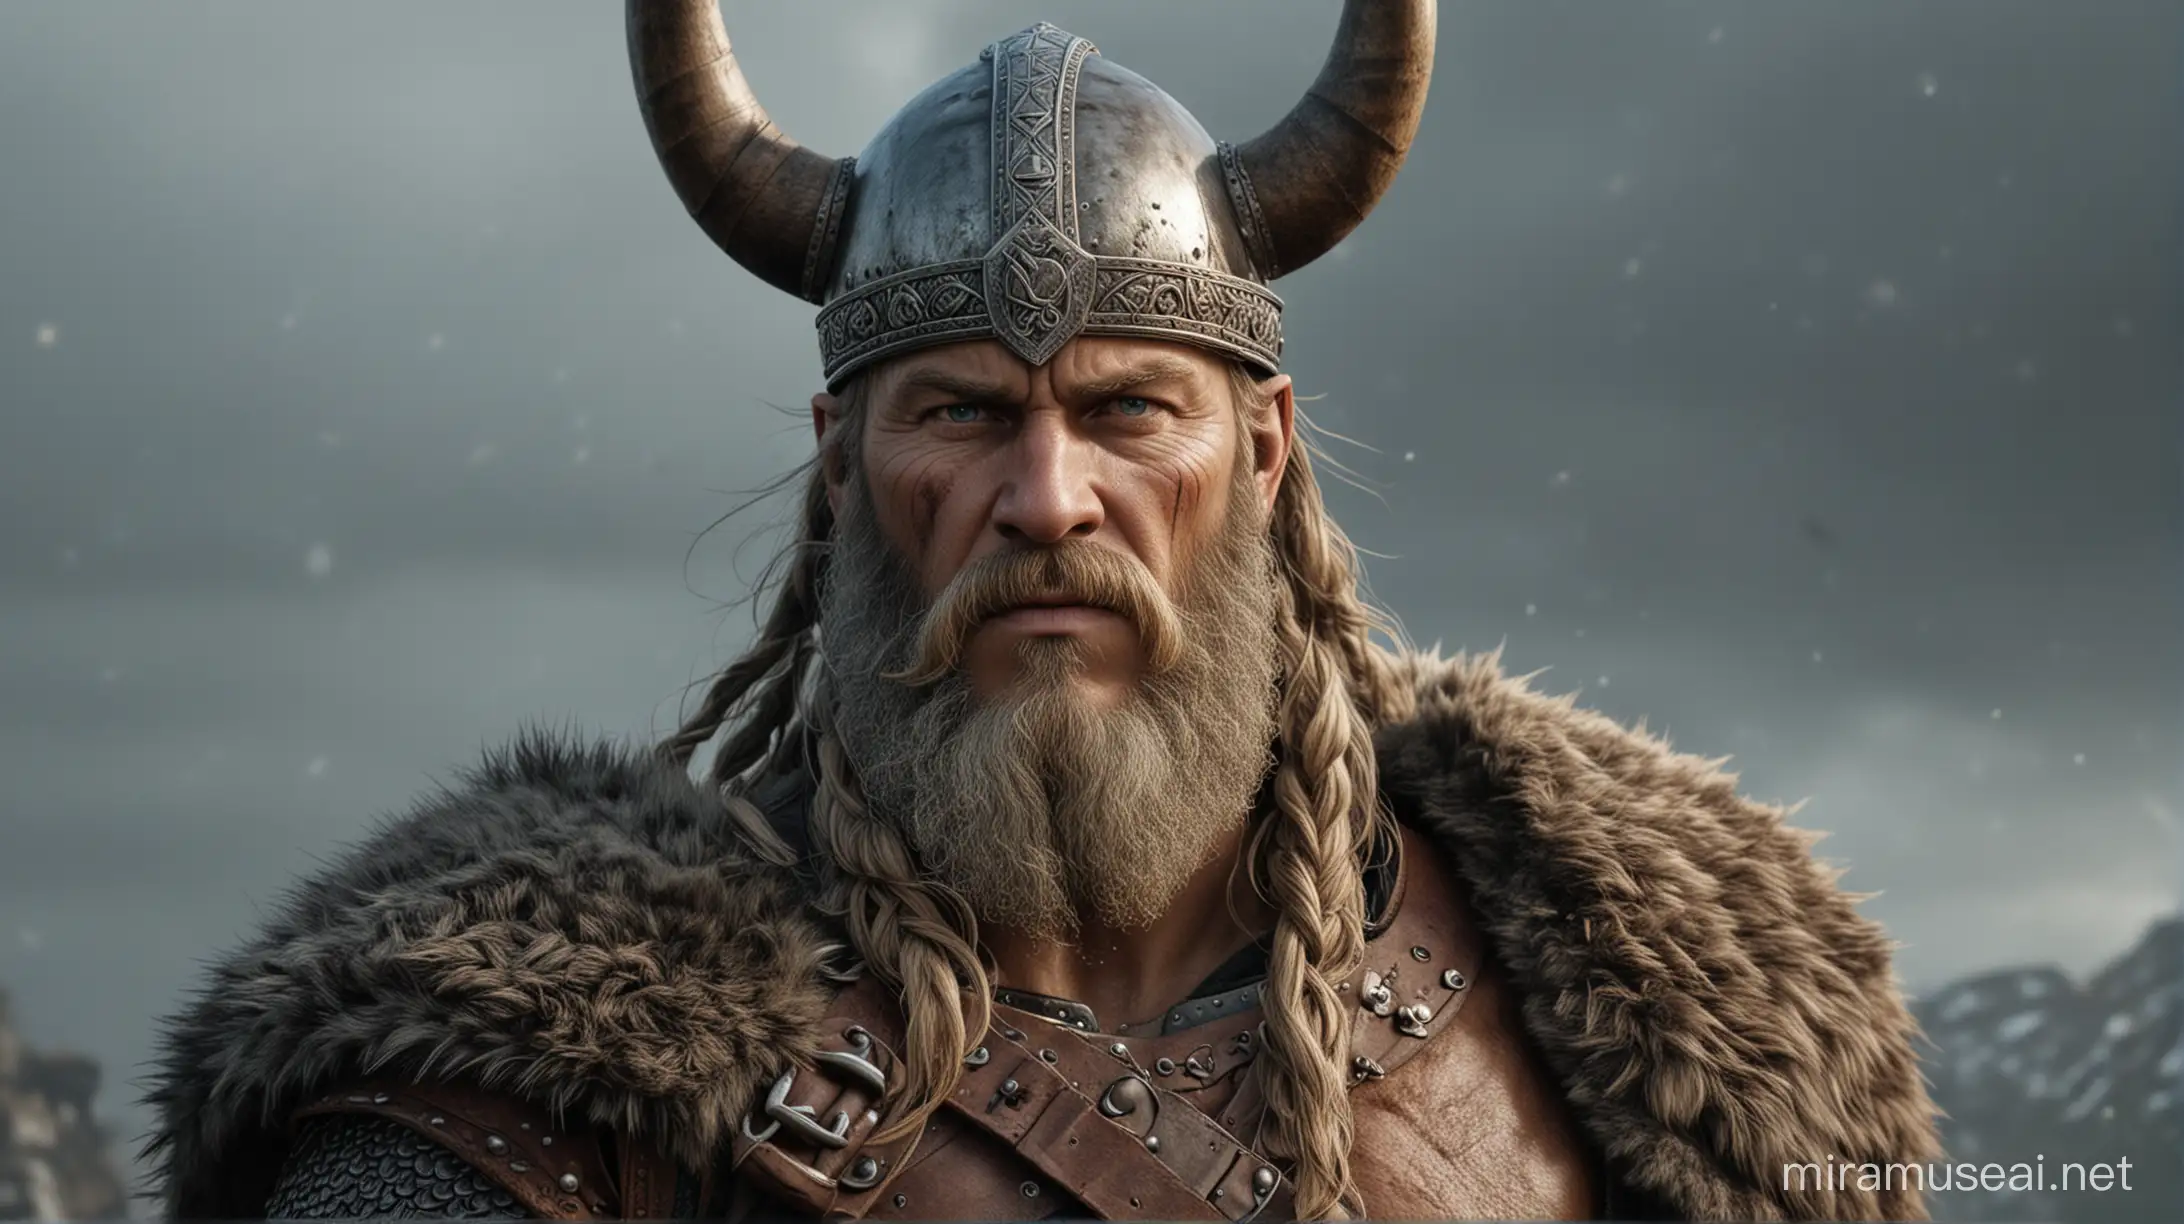 Vibrant Photorealistic Depiction of a Viking Warrior Leader